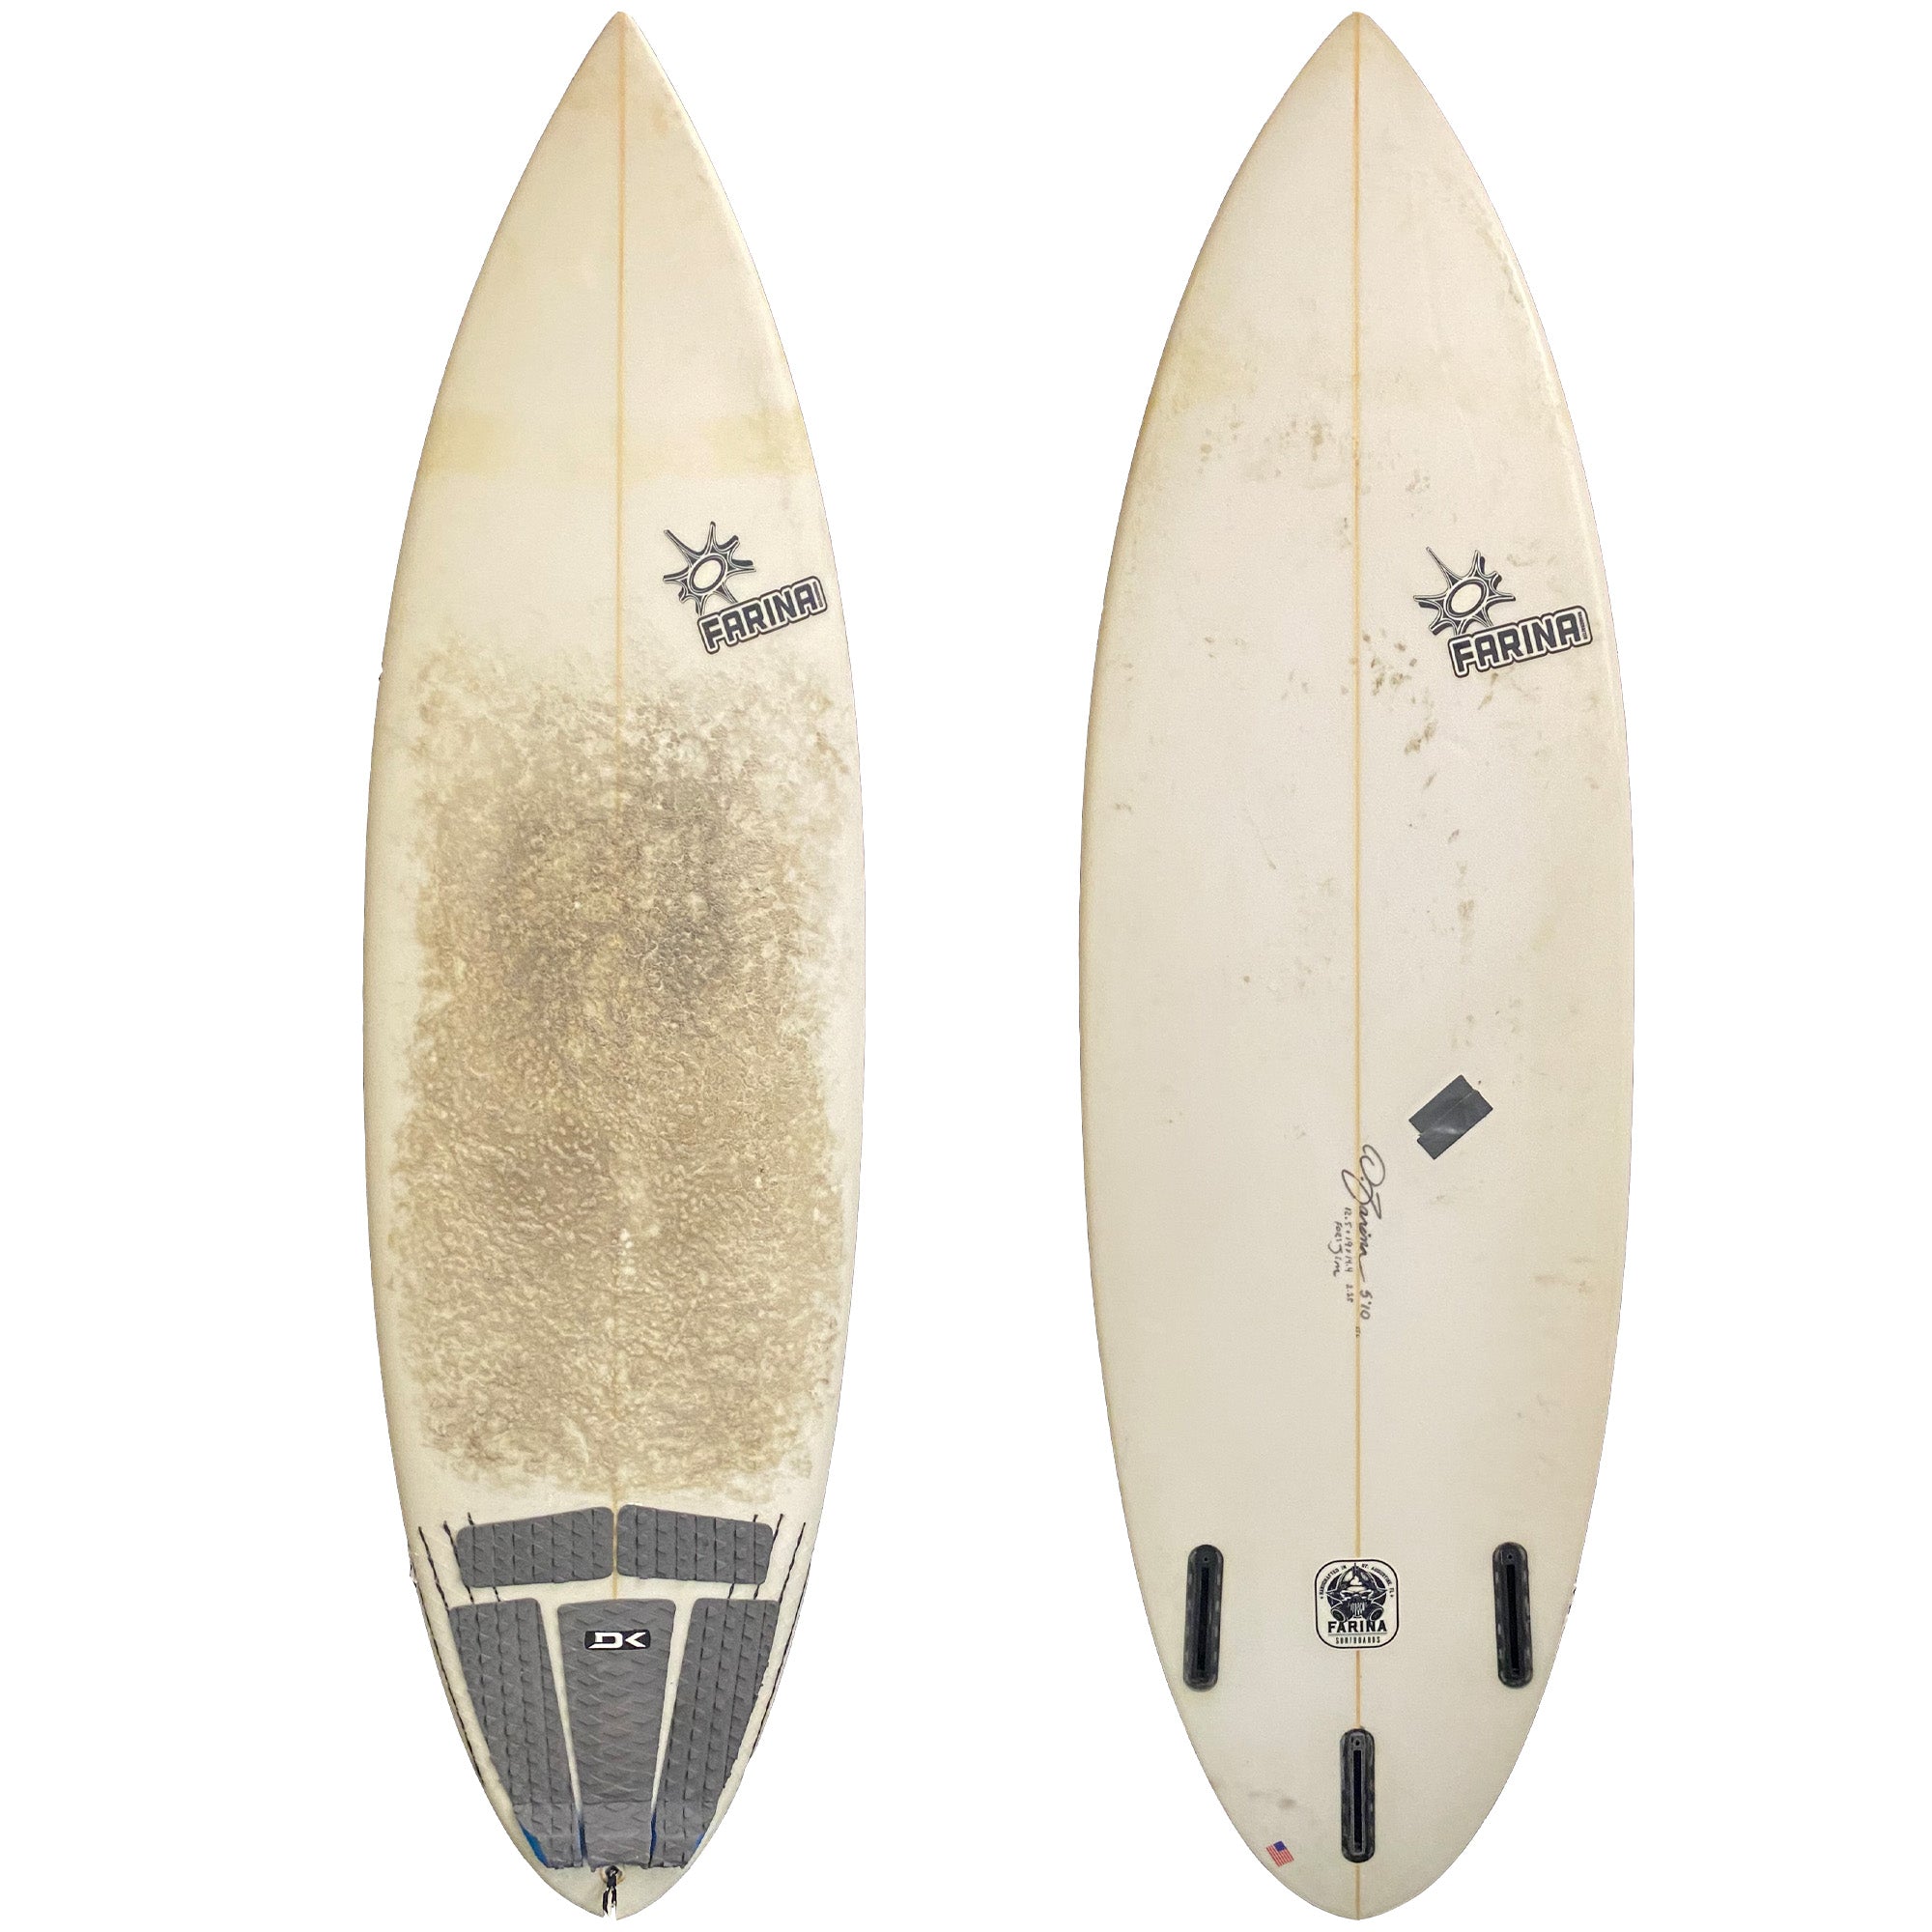 Farina Handcrafted 5'10 Consignment Surfboard